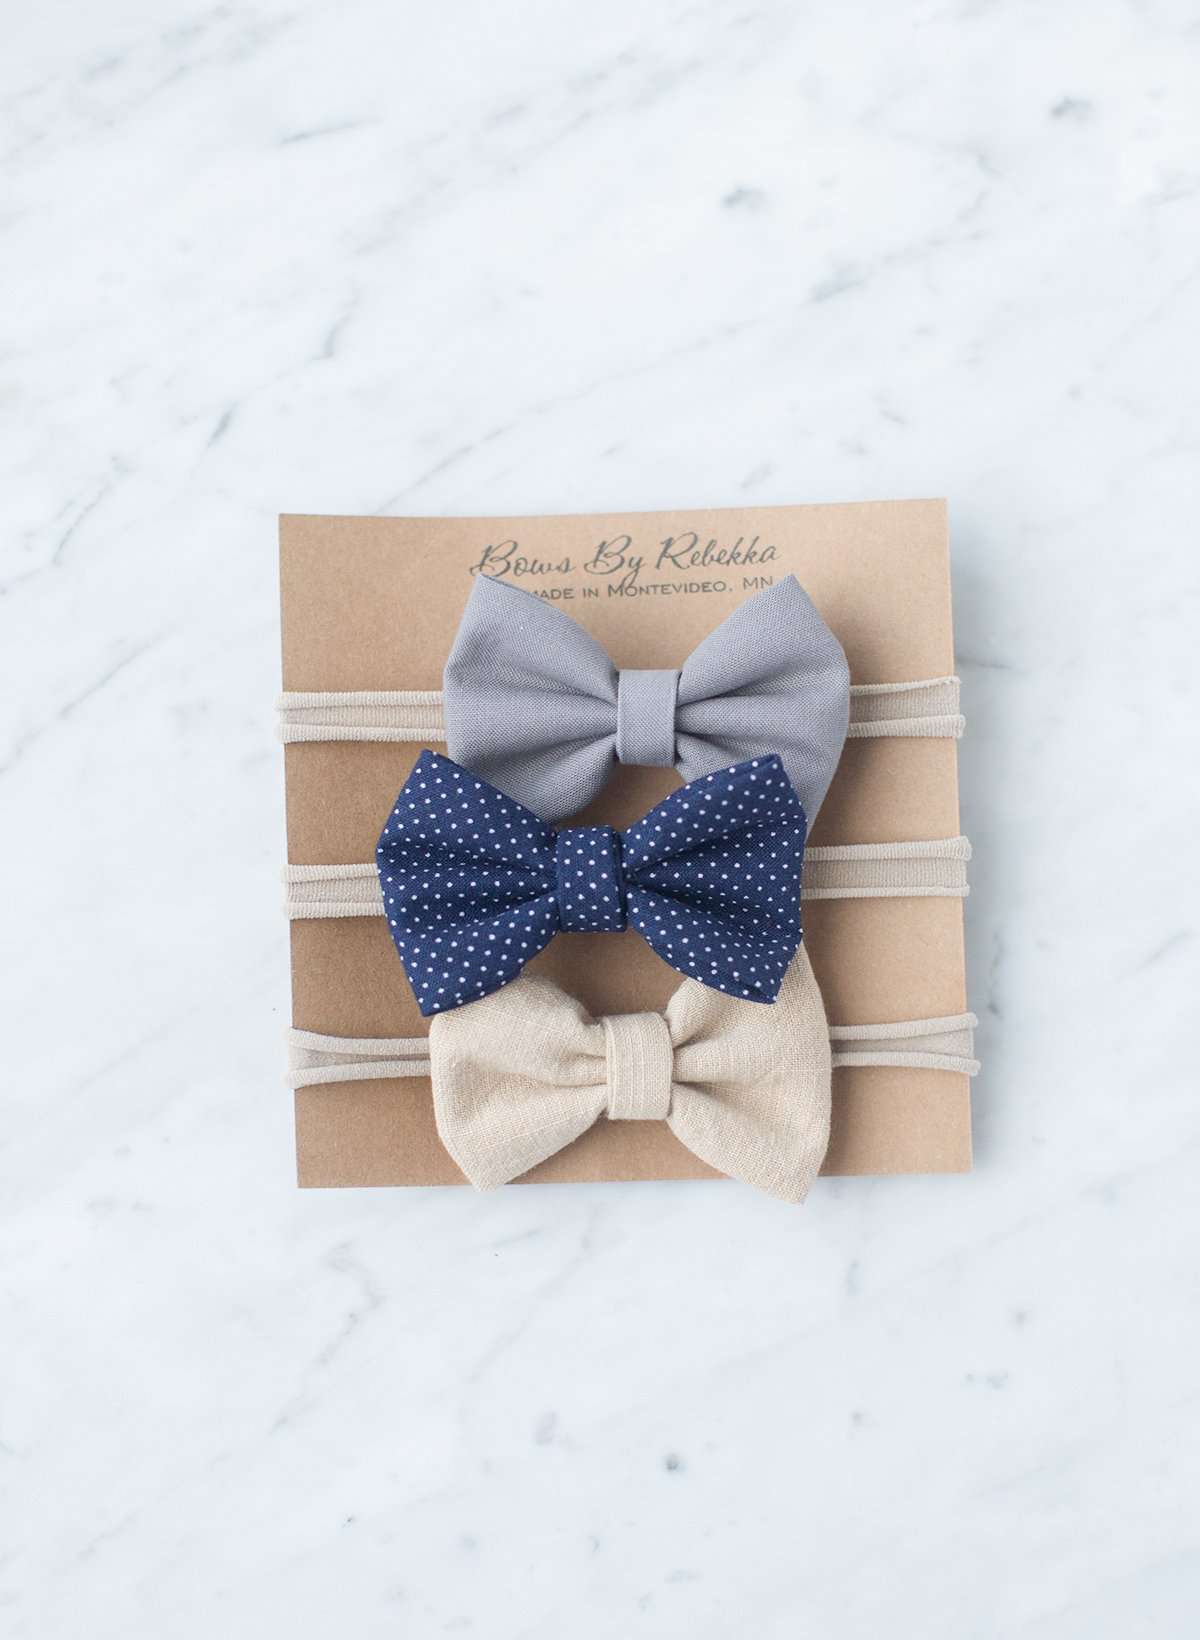 Little girls hair bow set of three. This shows a gray, taupe and navy polka dot headband or alligator clip bow.